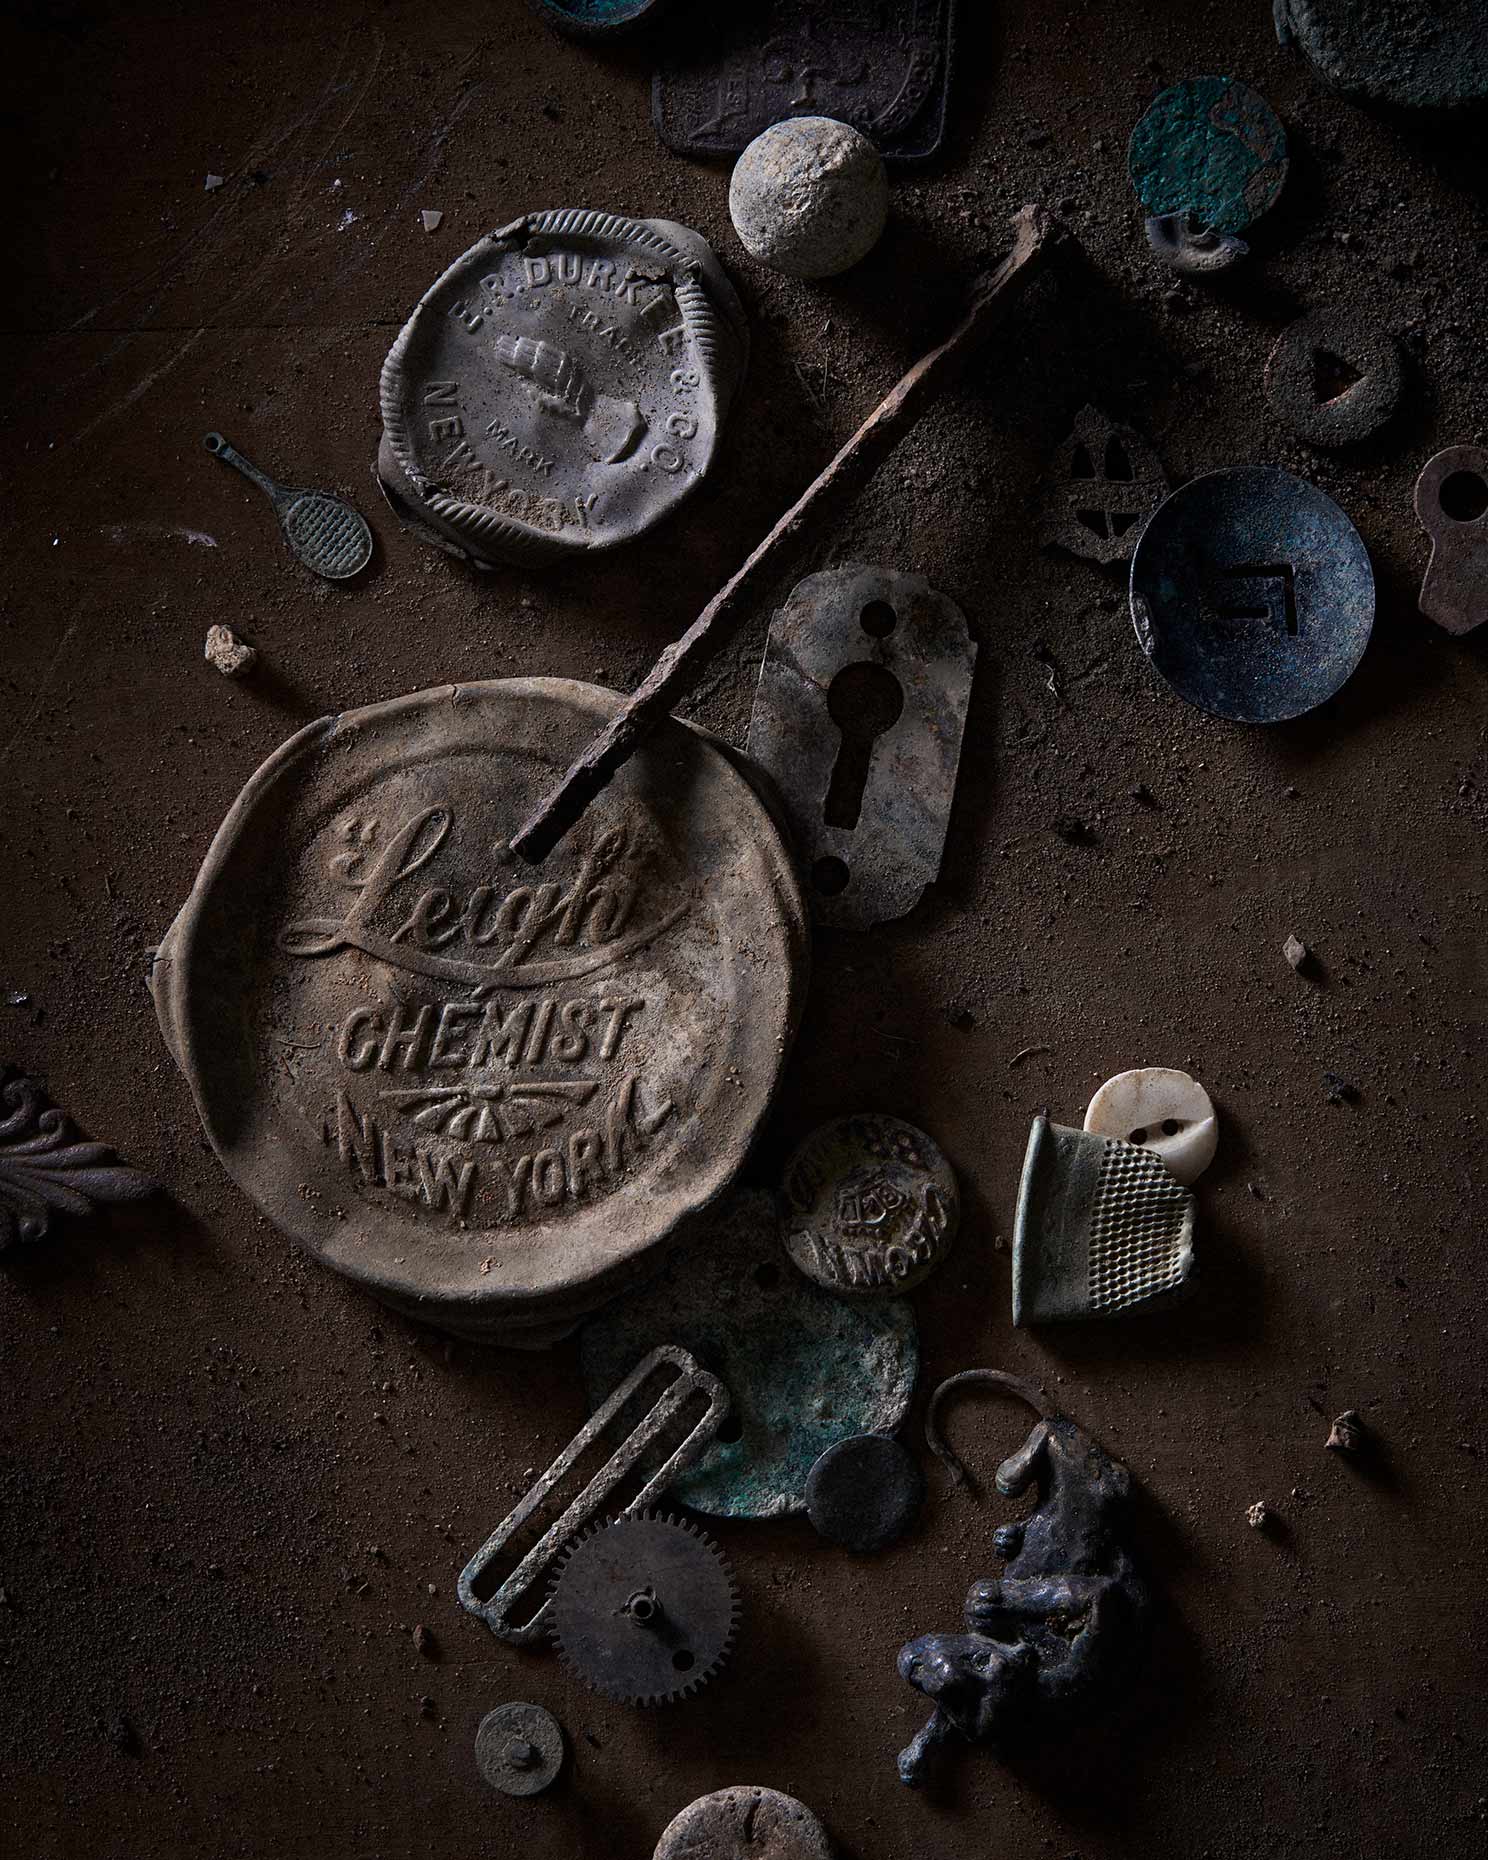 Found objects from metal detector collection